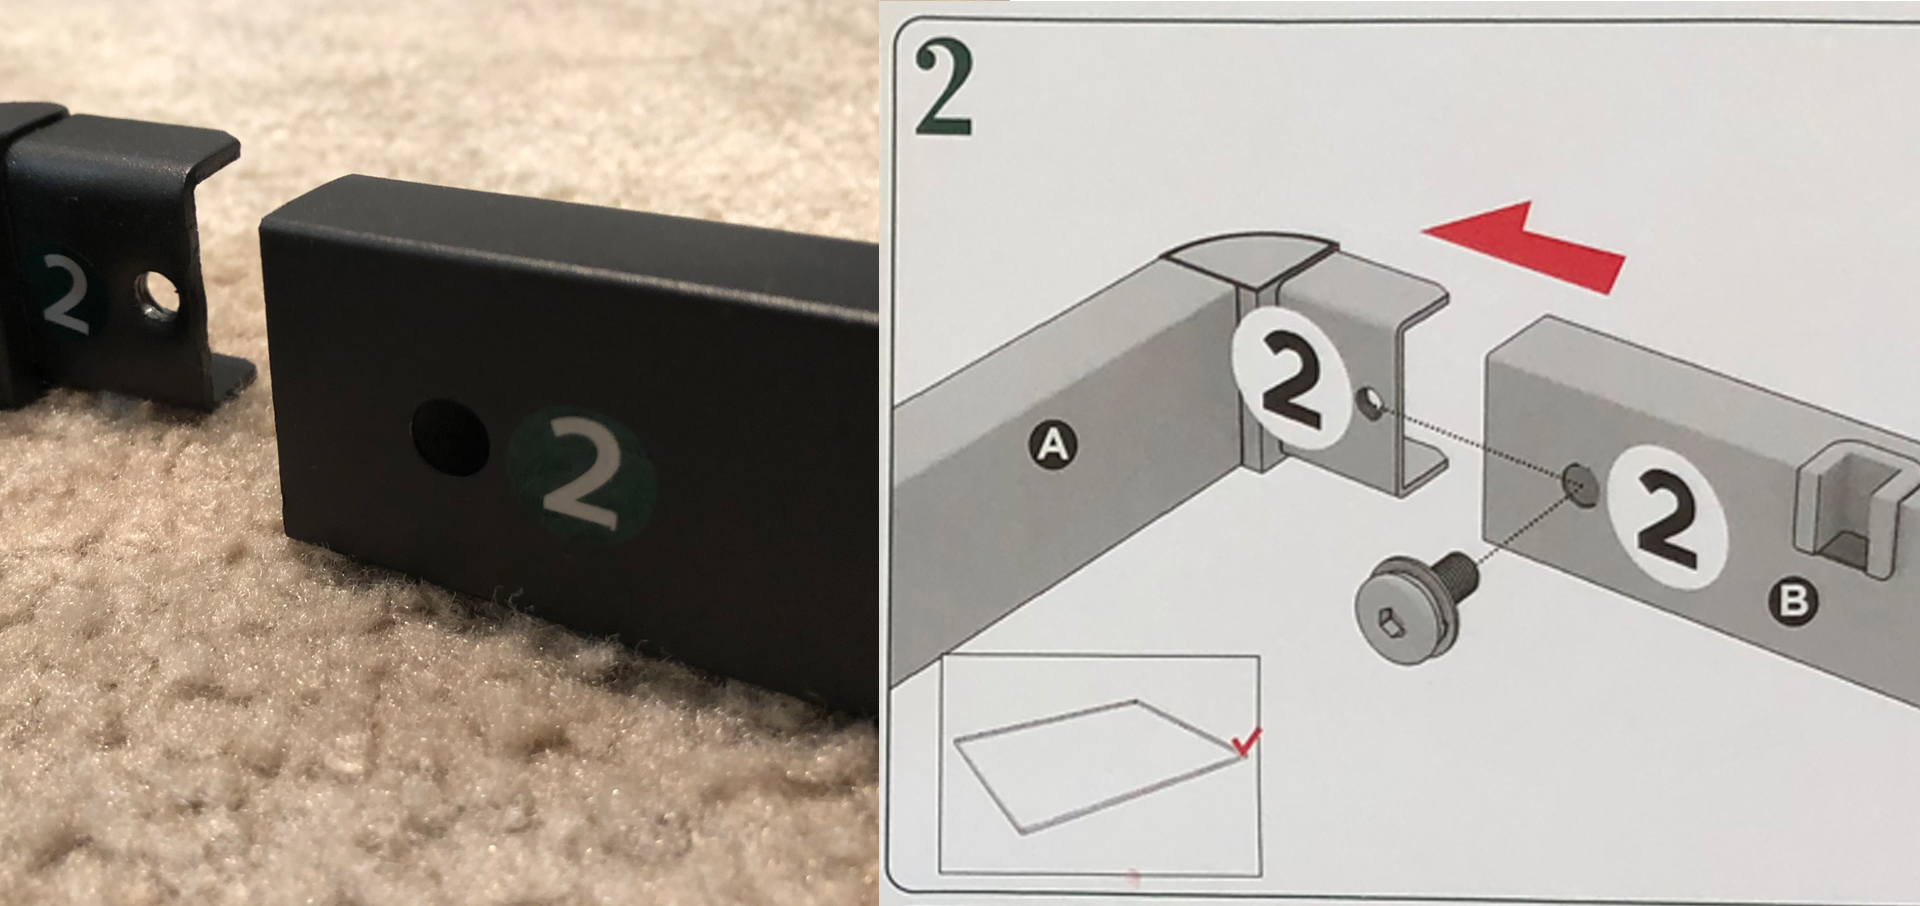 Bunkie board by Zinus, a photo of the product vs. assembly instruction manual.